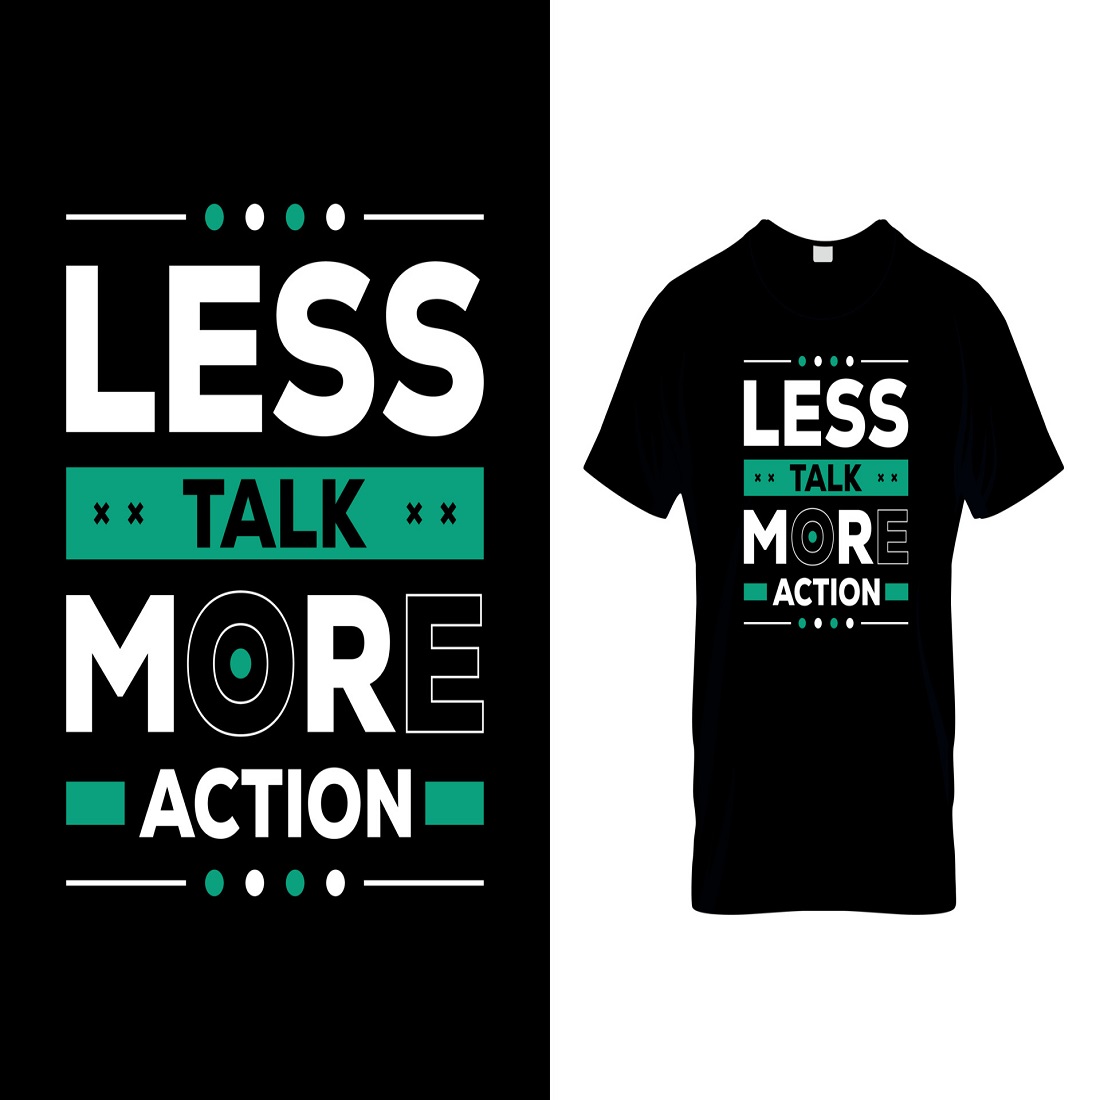 Less talk more action t-shirts design preview image.